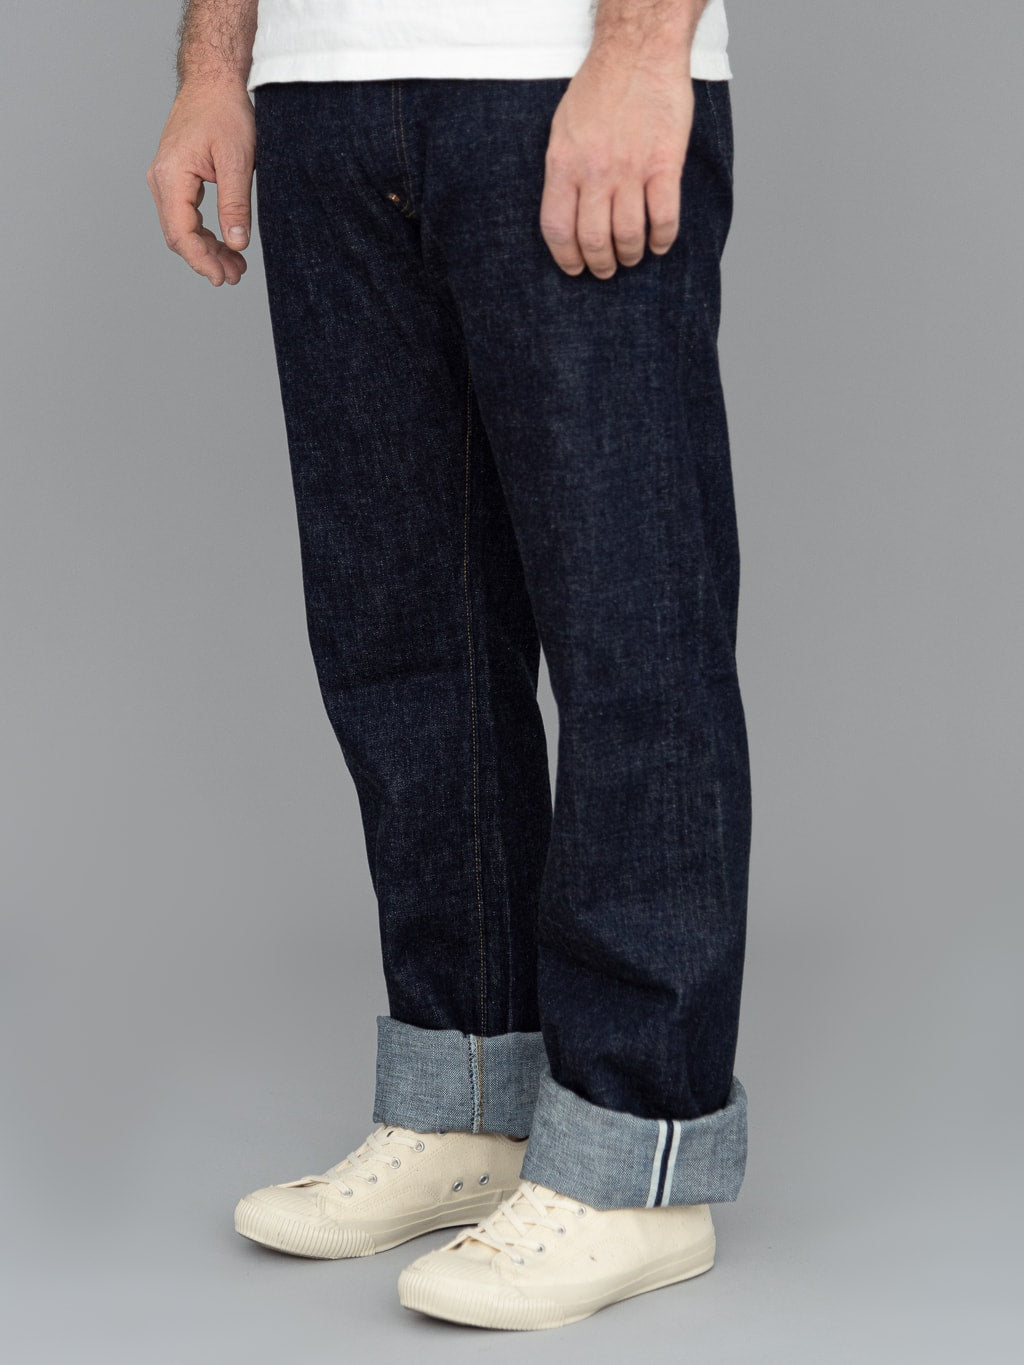 TCB 20s indigo Jeans one wash vintage style selvedge side